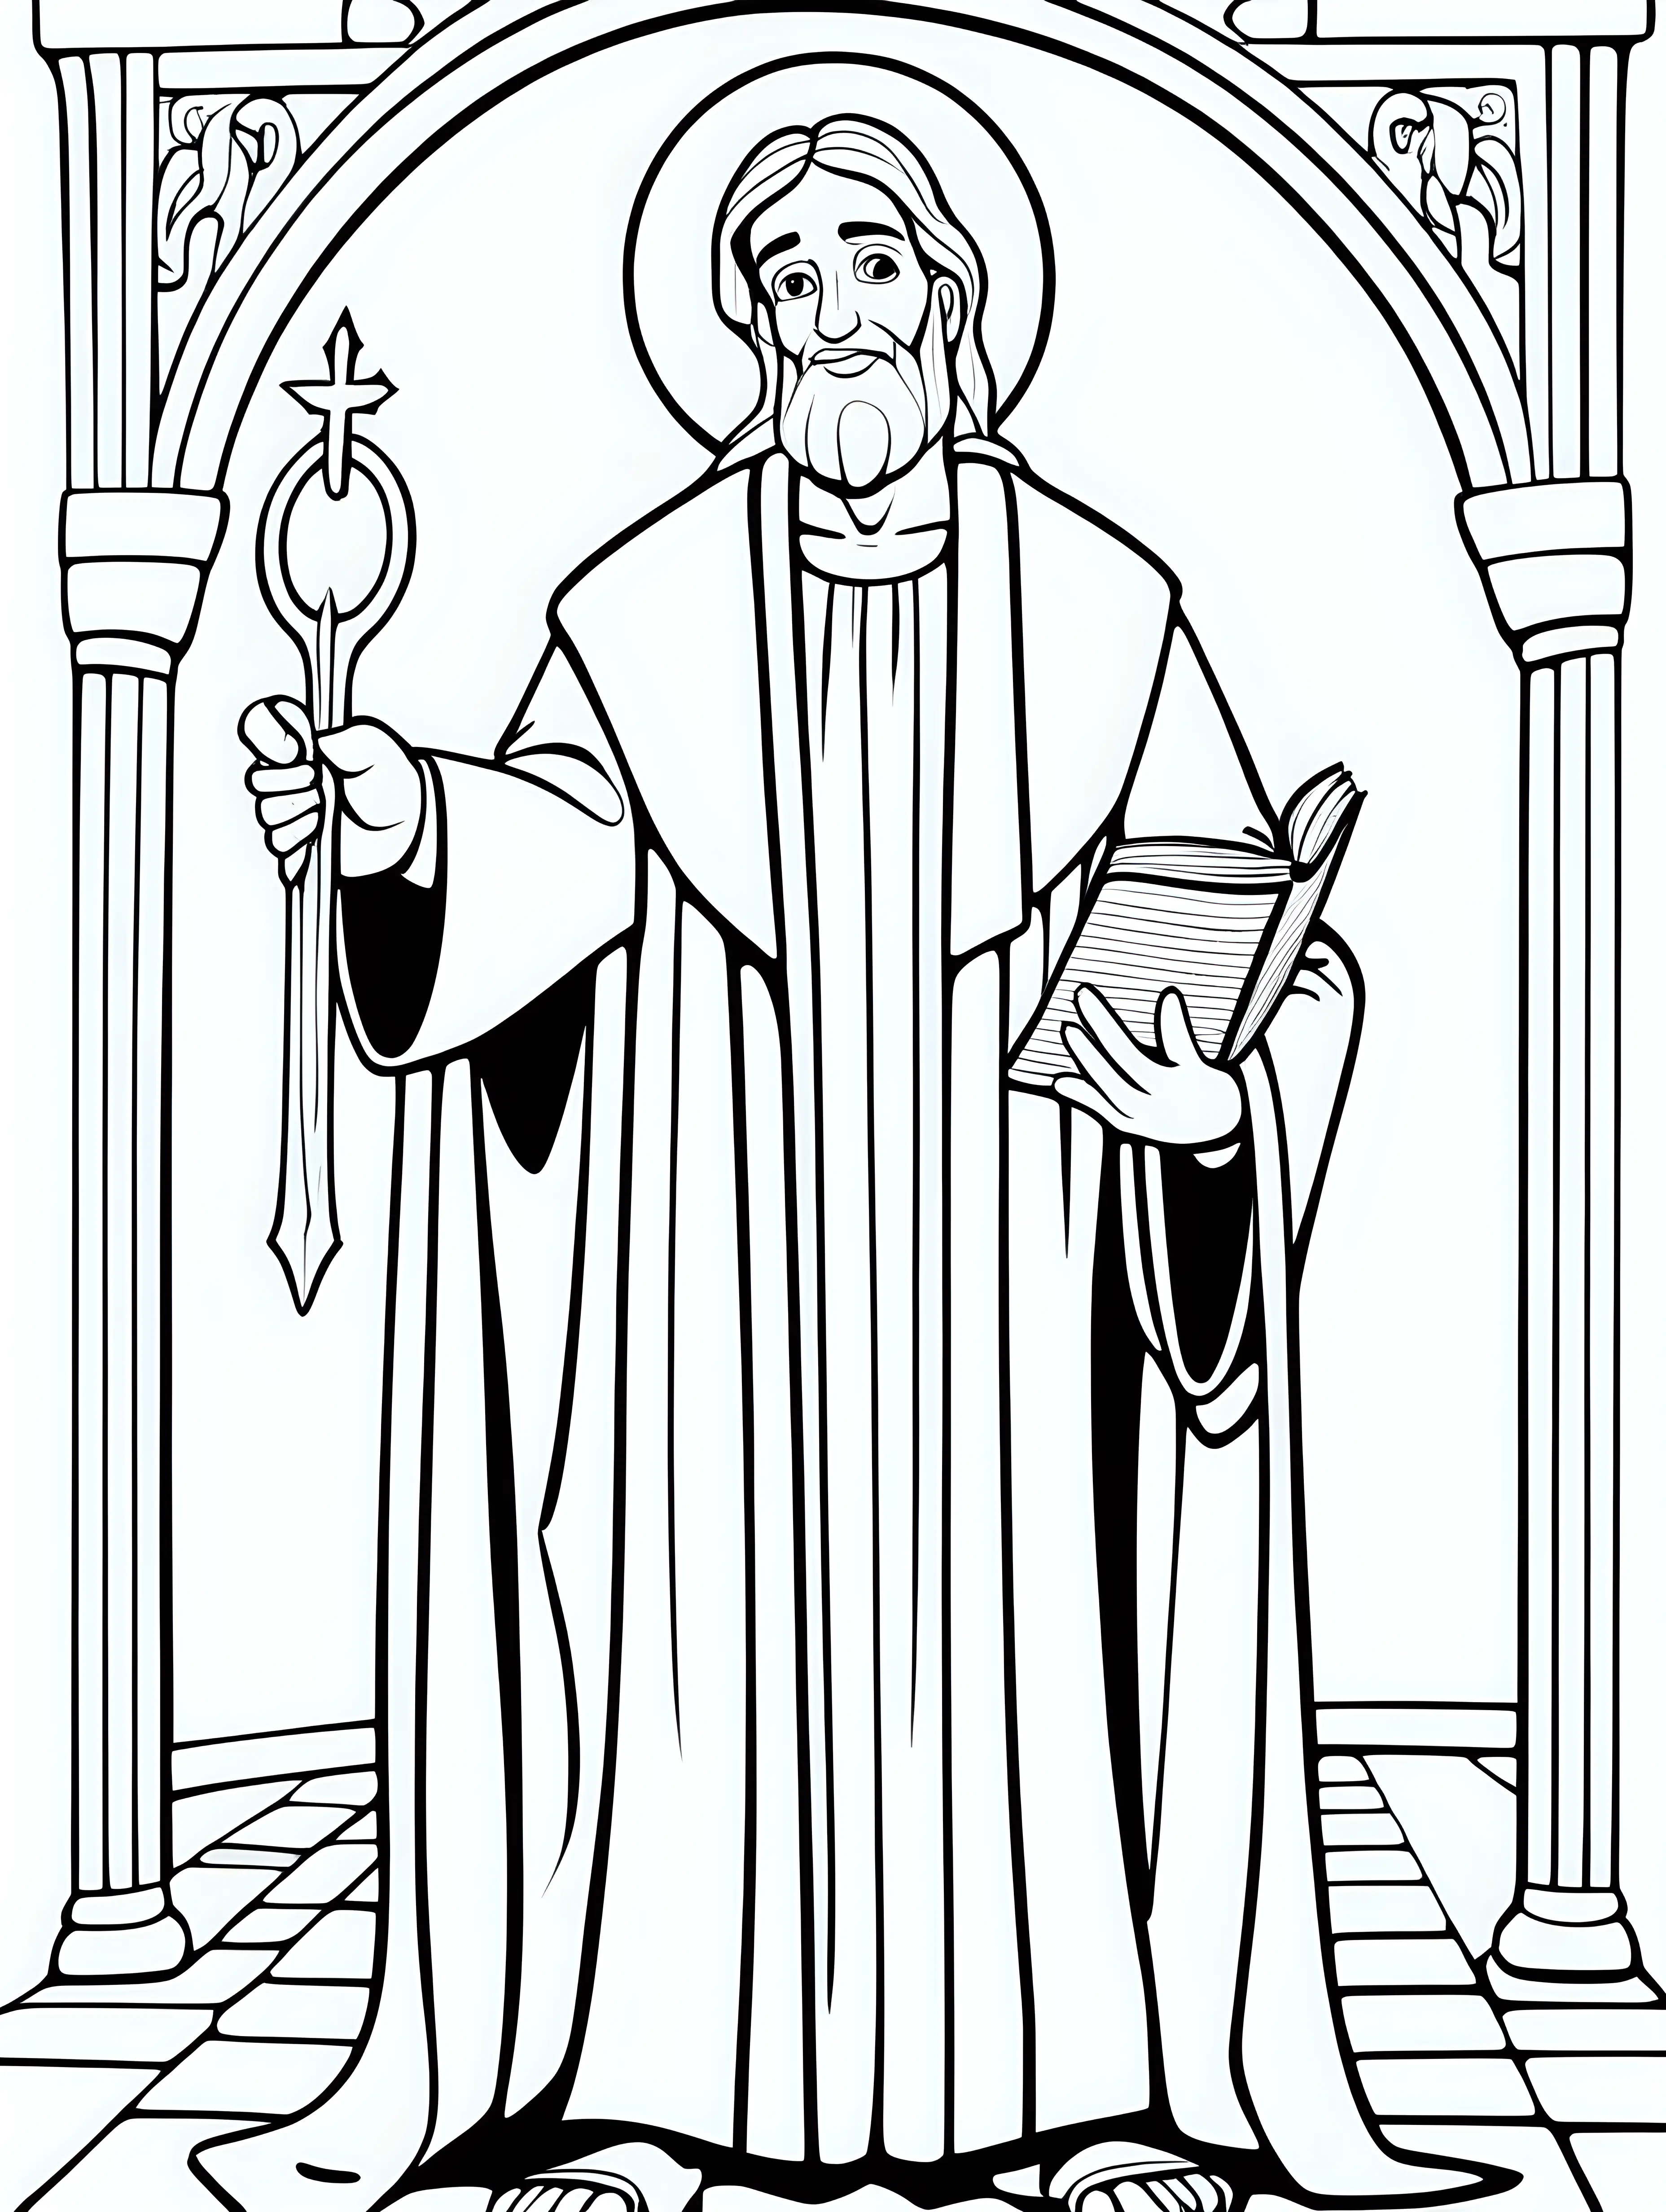 Christian Bible Character Coloring Page Cartoon Style with Thin Lines